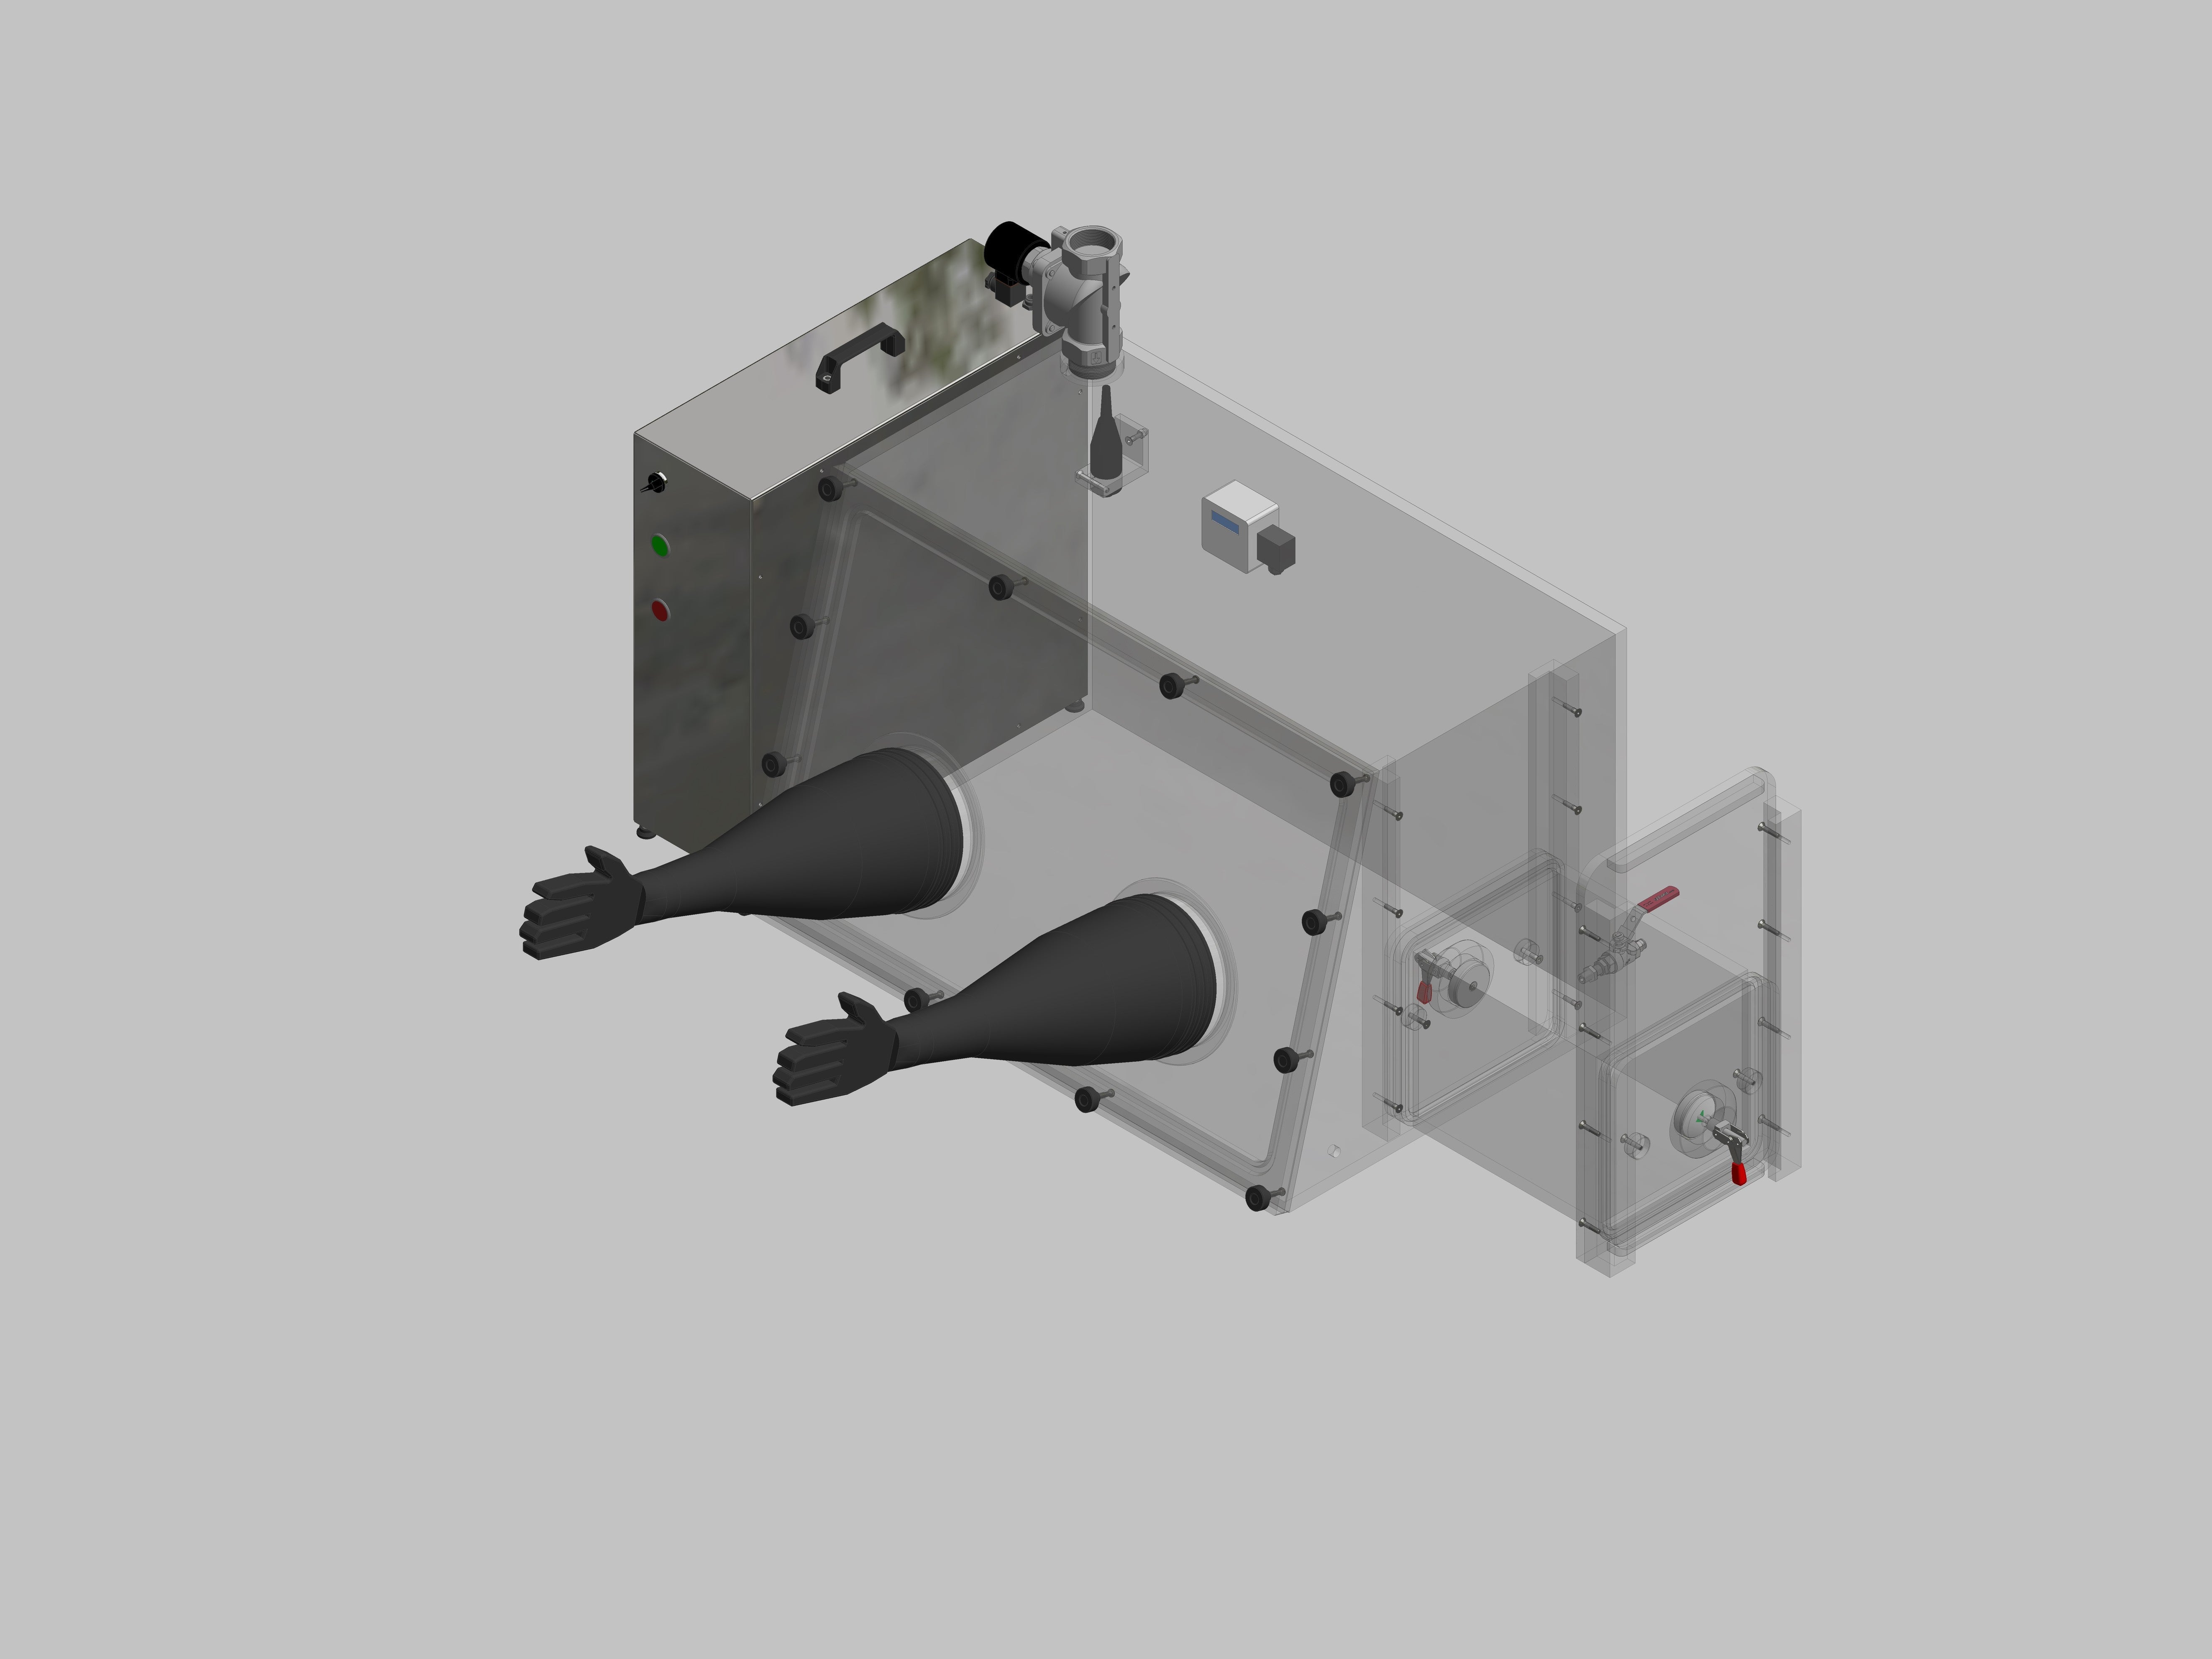 Glovebox made of acrylic&gt; Gas filling: automatic flushing with pressure control, front design: removable, side design: rectangular lock control: oxygen regulator with data logger